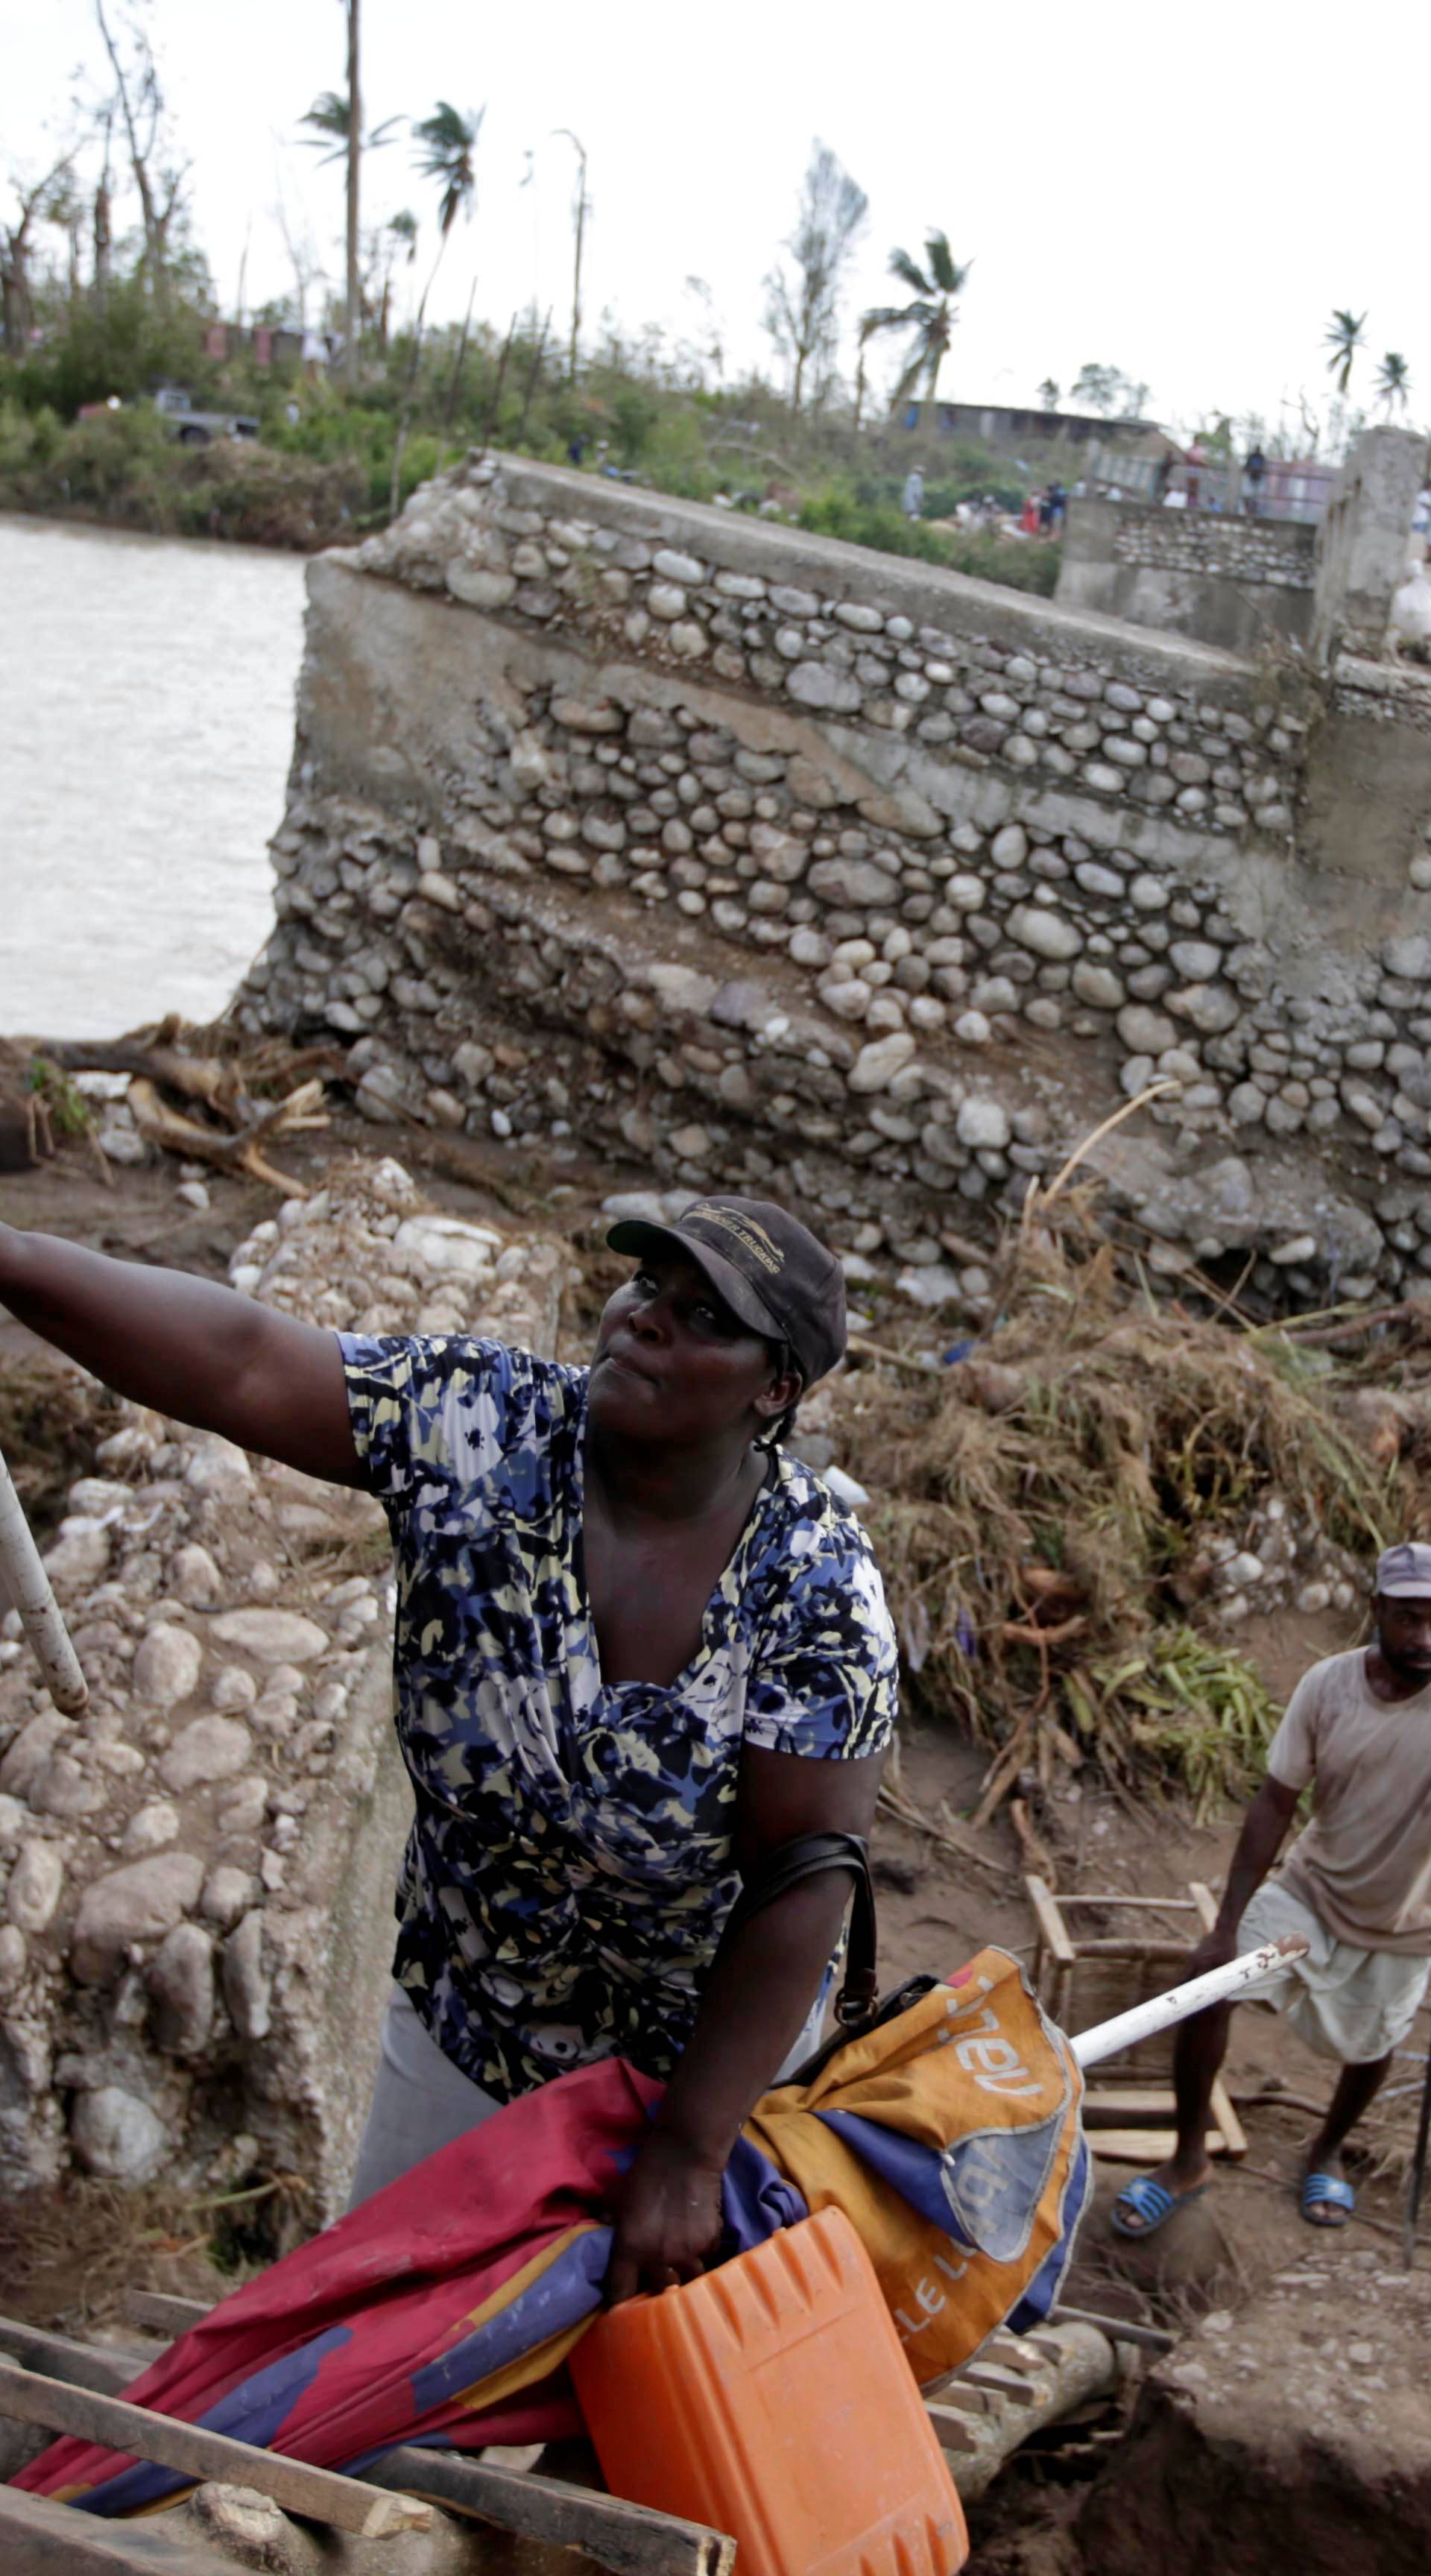 People use a handmade ladder after the bridge has been destroyed by Hurricane Matthew in Chantal